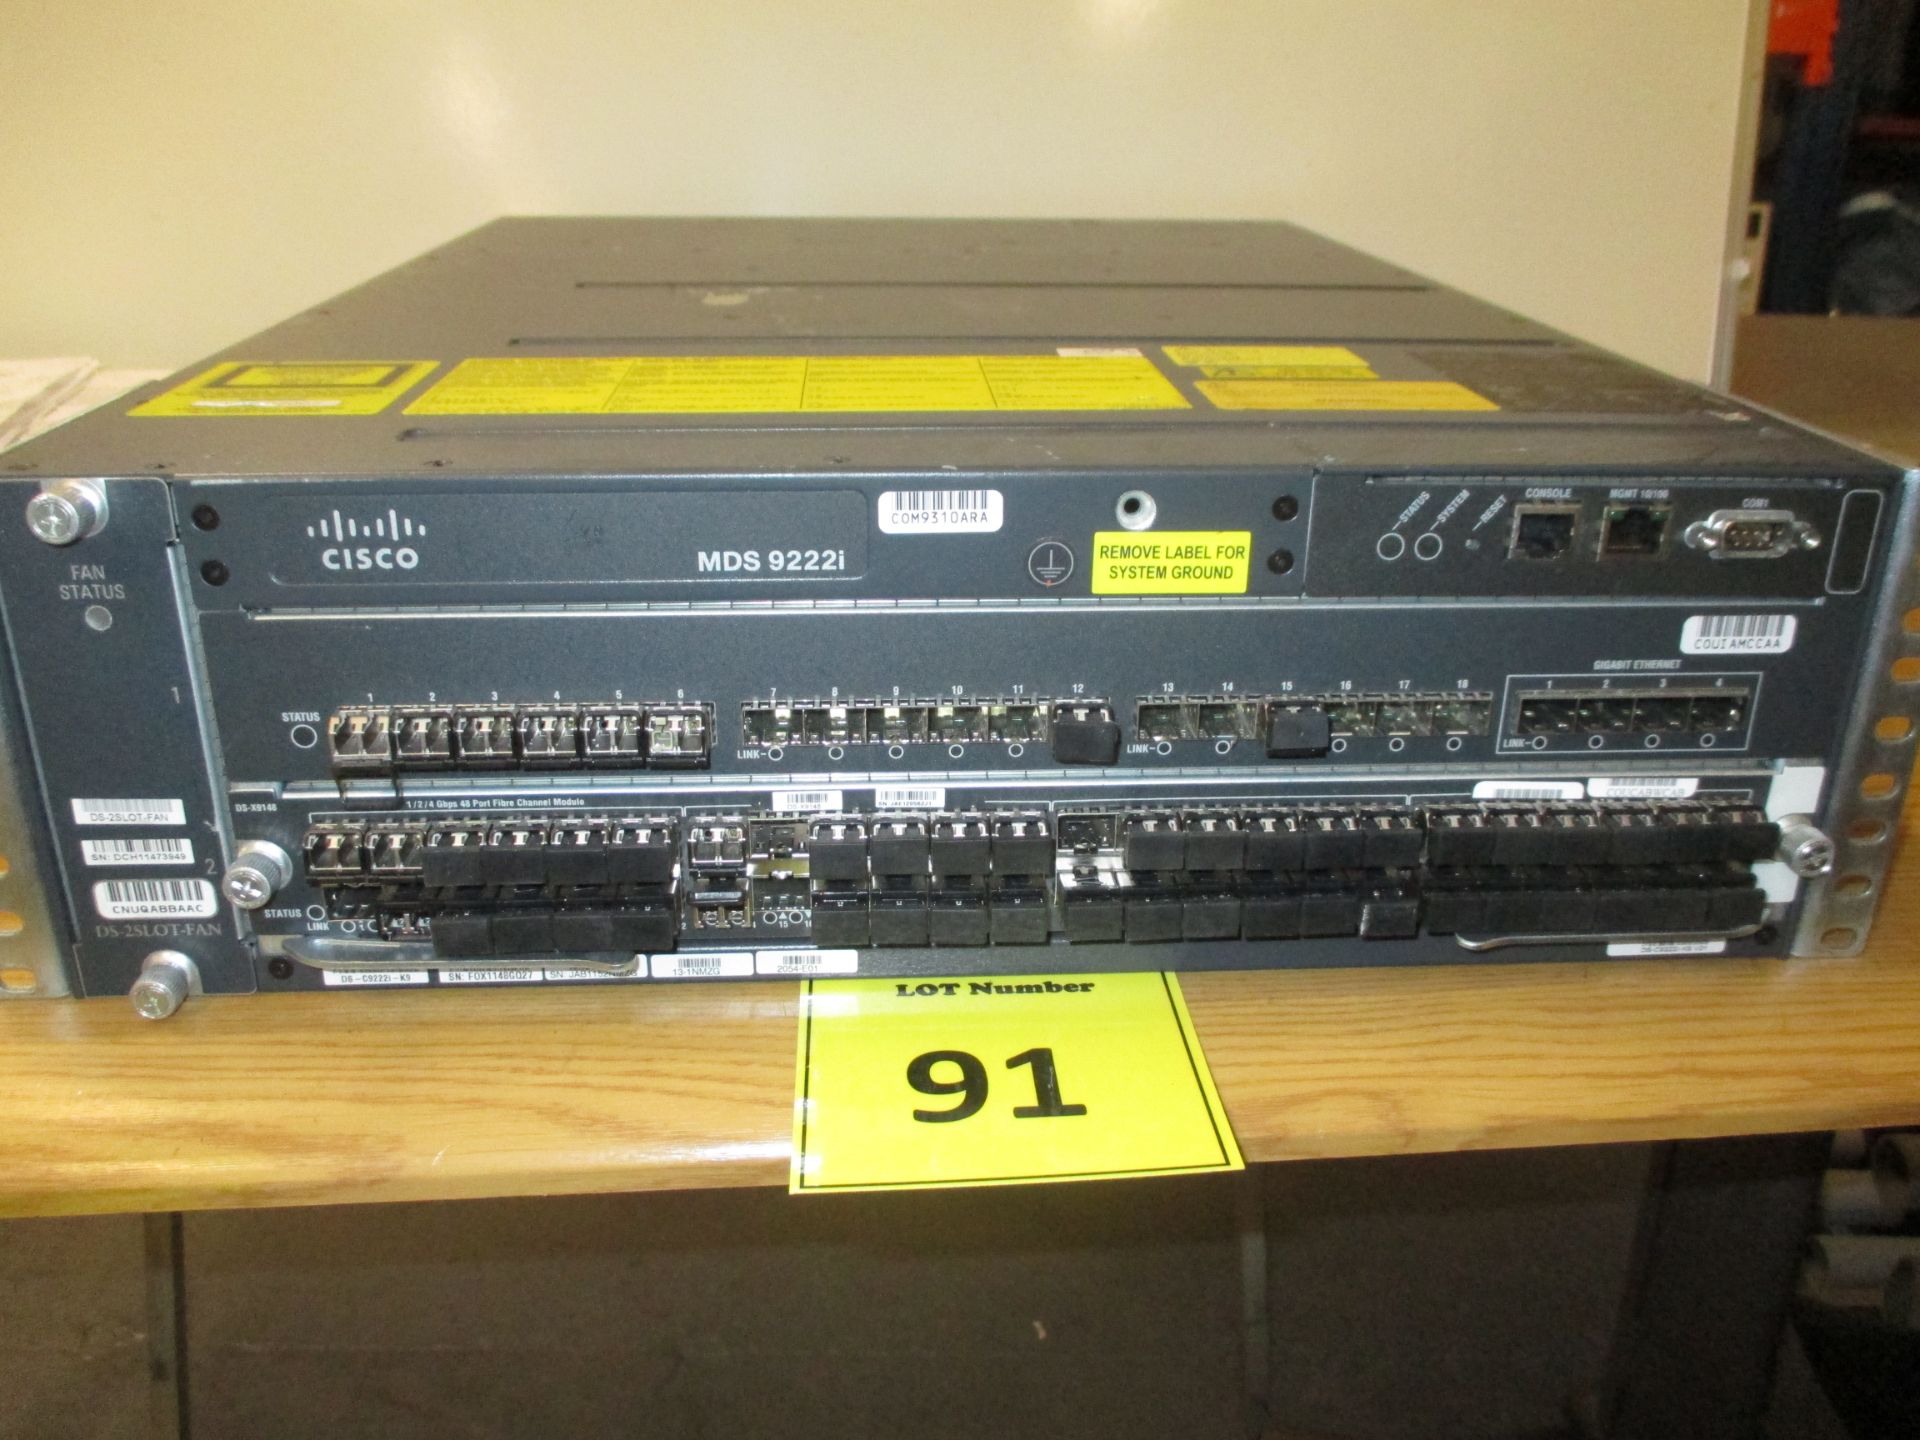 CISCO MDS 9222i WITH GIGABIT ETHERNET AND DS-X9148 1/2/4 Gbps 48 PORT FIBRE CHANNEL MODULE. COMPLETE